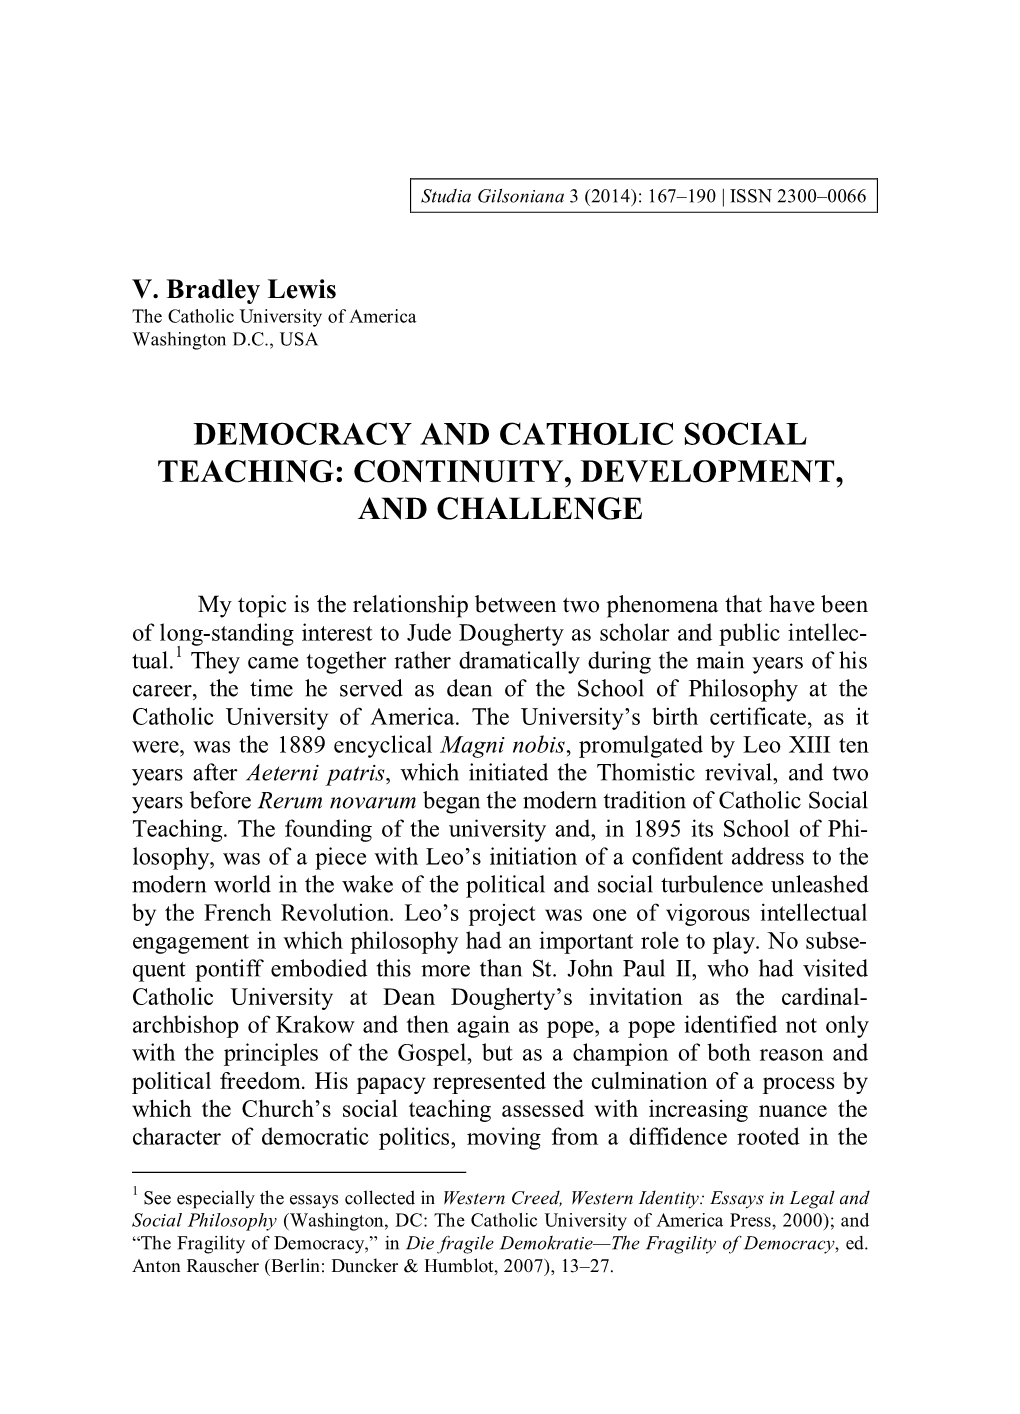 Democracy and Catholic Social Teaching: Continuity, Development, and Challenge